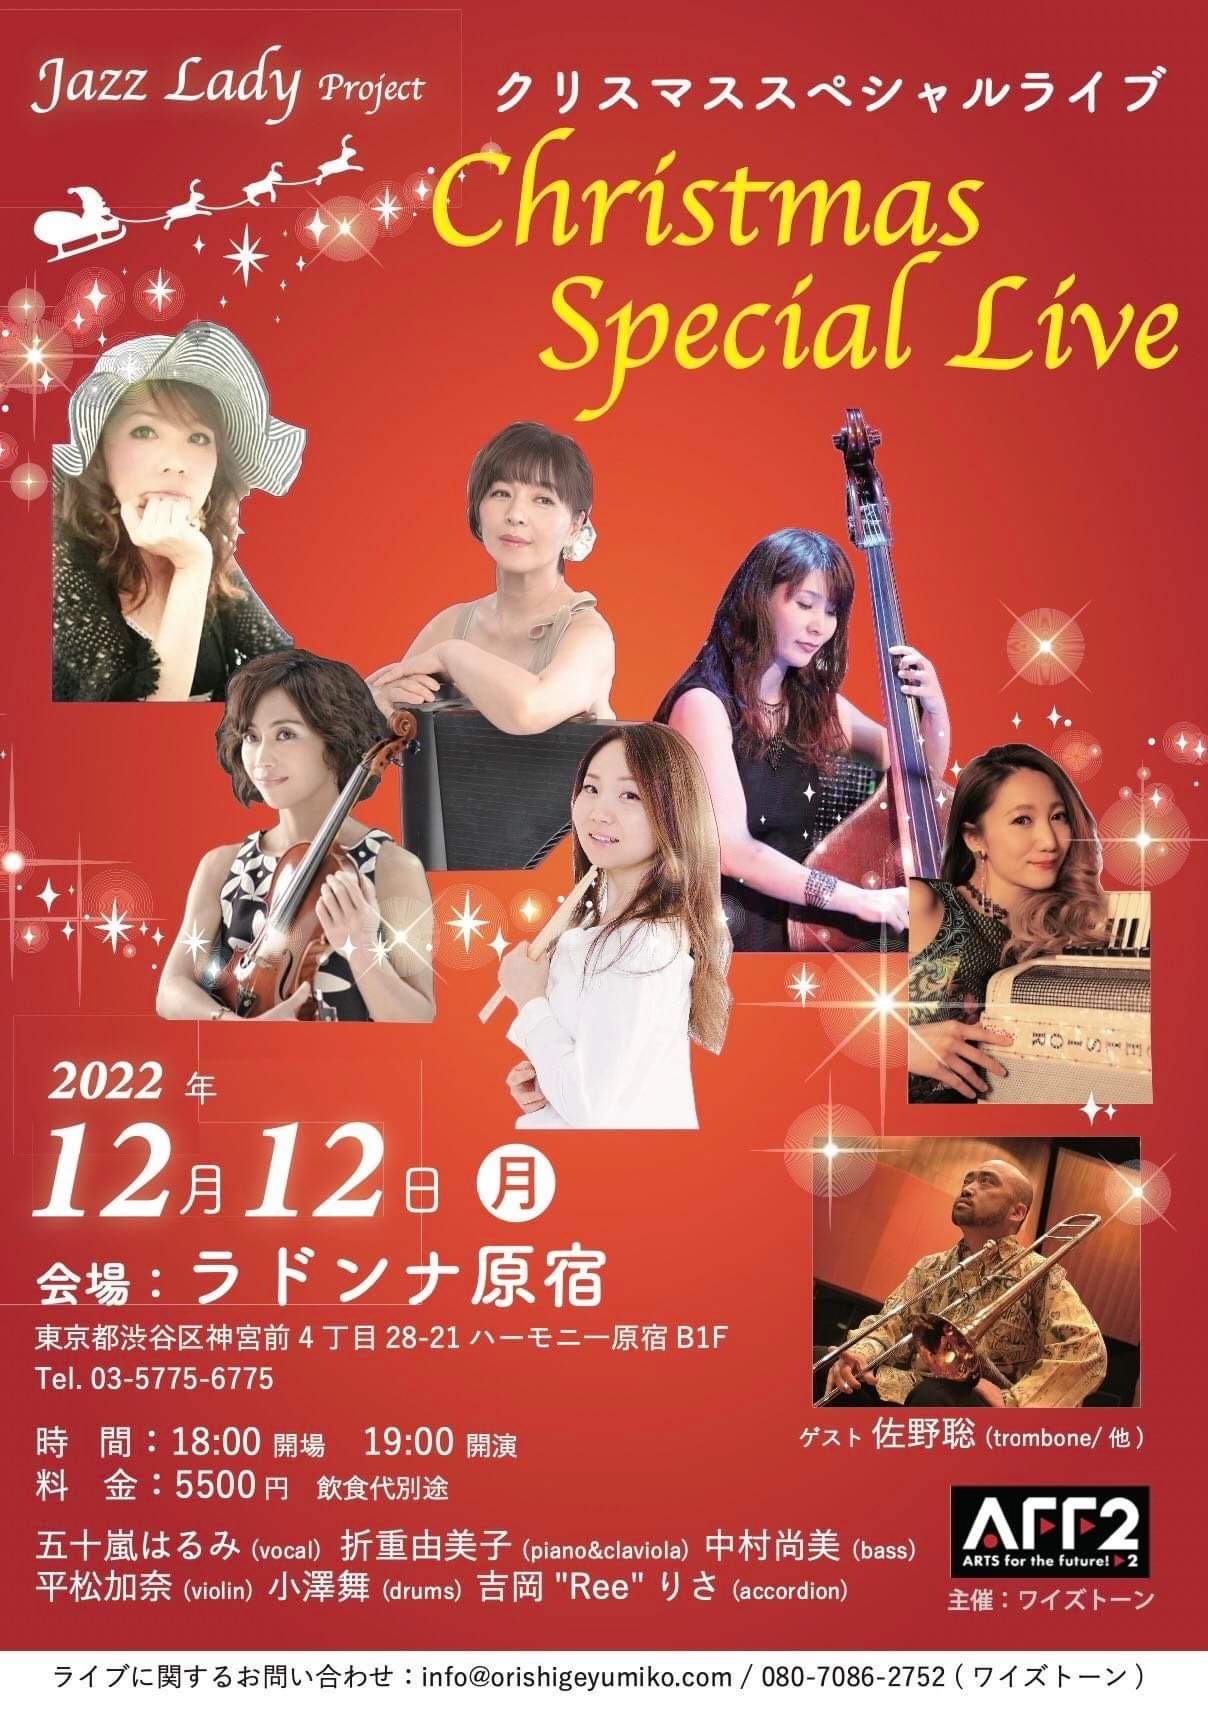 Jazz Lady Project Christmas Special Live